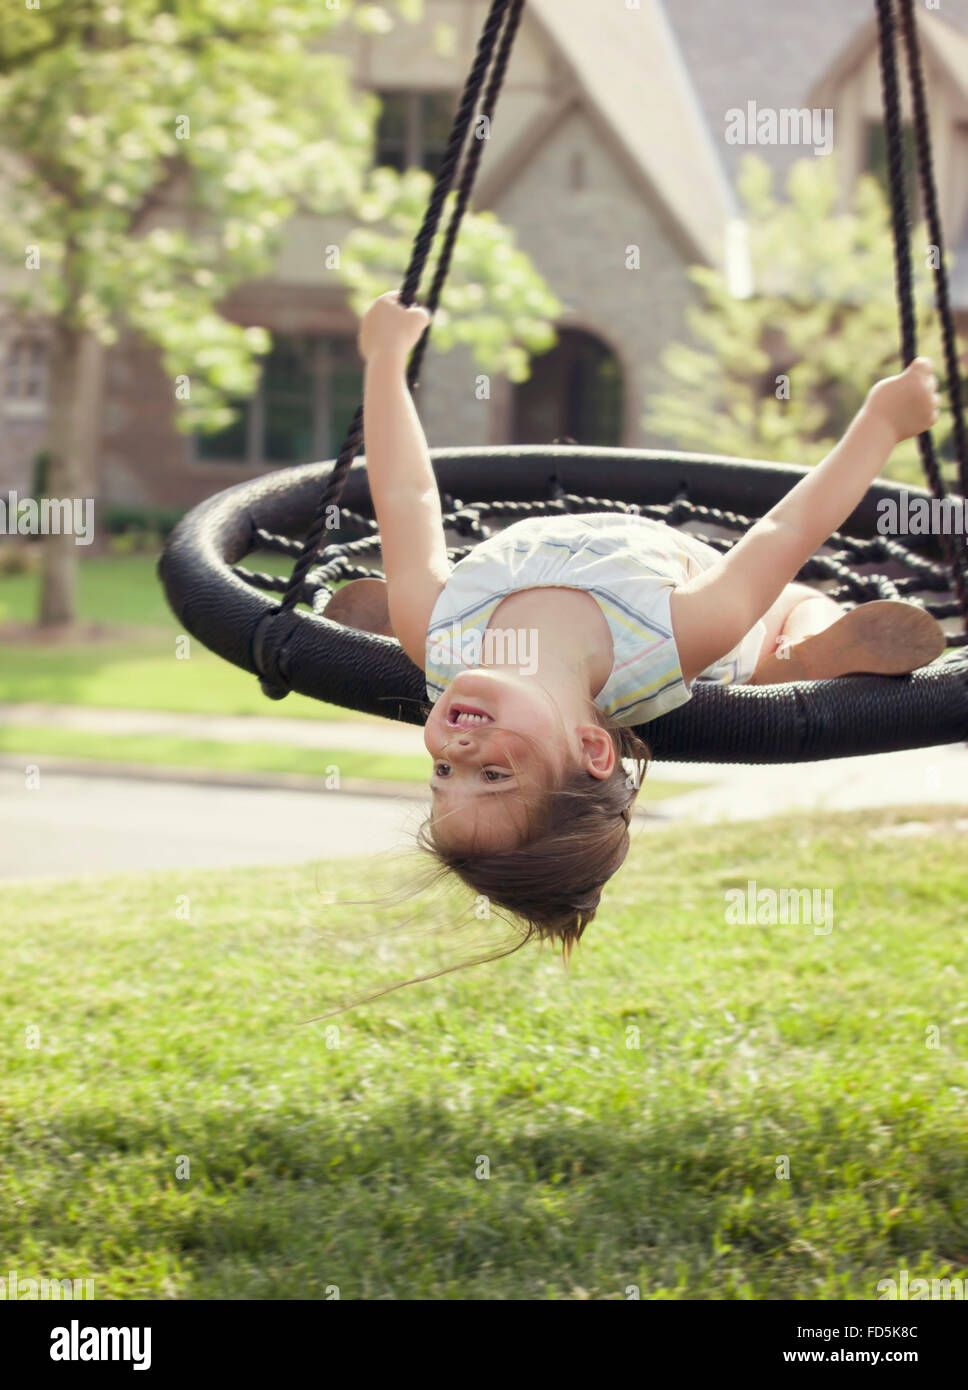 Young girl hanging upside down from her swing and smiling. Stock Photo